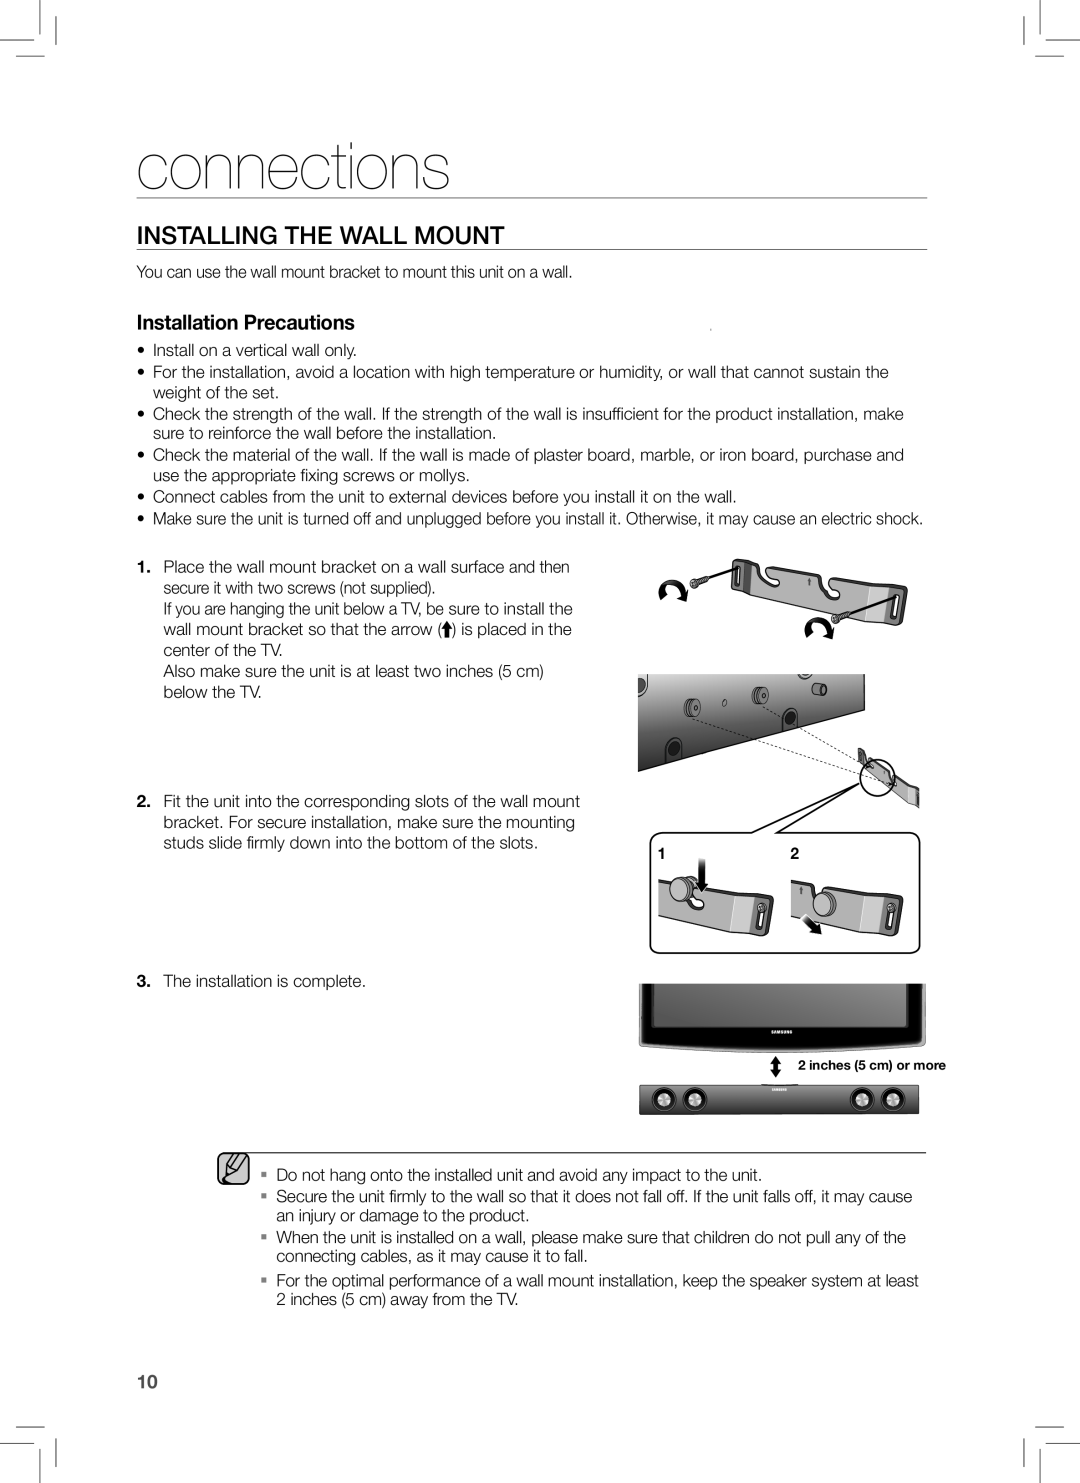 Samsung HW-E350 user manual connections, Installing The Wall Mount, Installation Precautions 